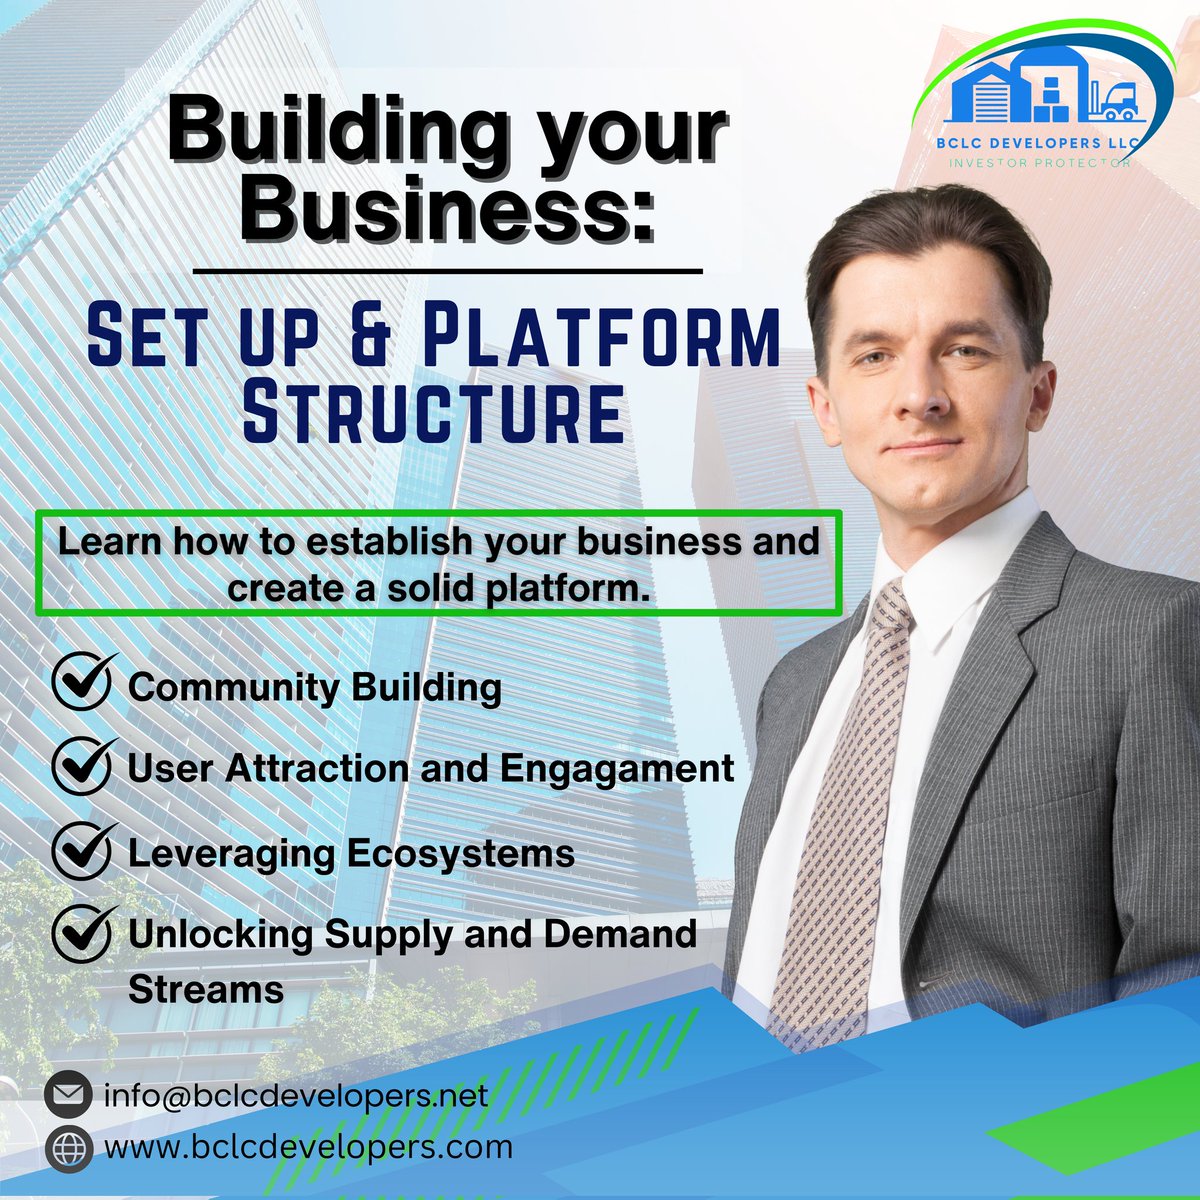 Building your business: Set up and Platform Structure
Let us guide you towards long-term growth and prosperity. 🌿
#jacksonvilleflorida #bclcdevelopers #buildingbusiness